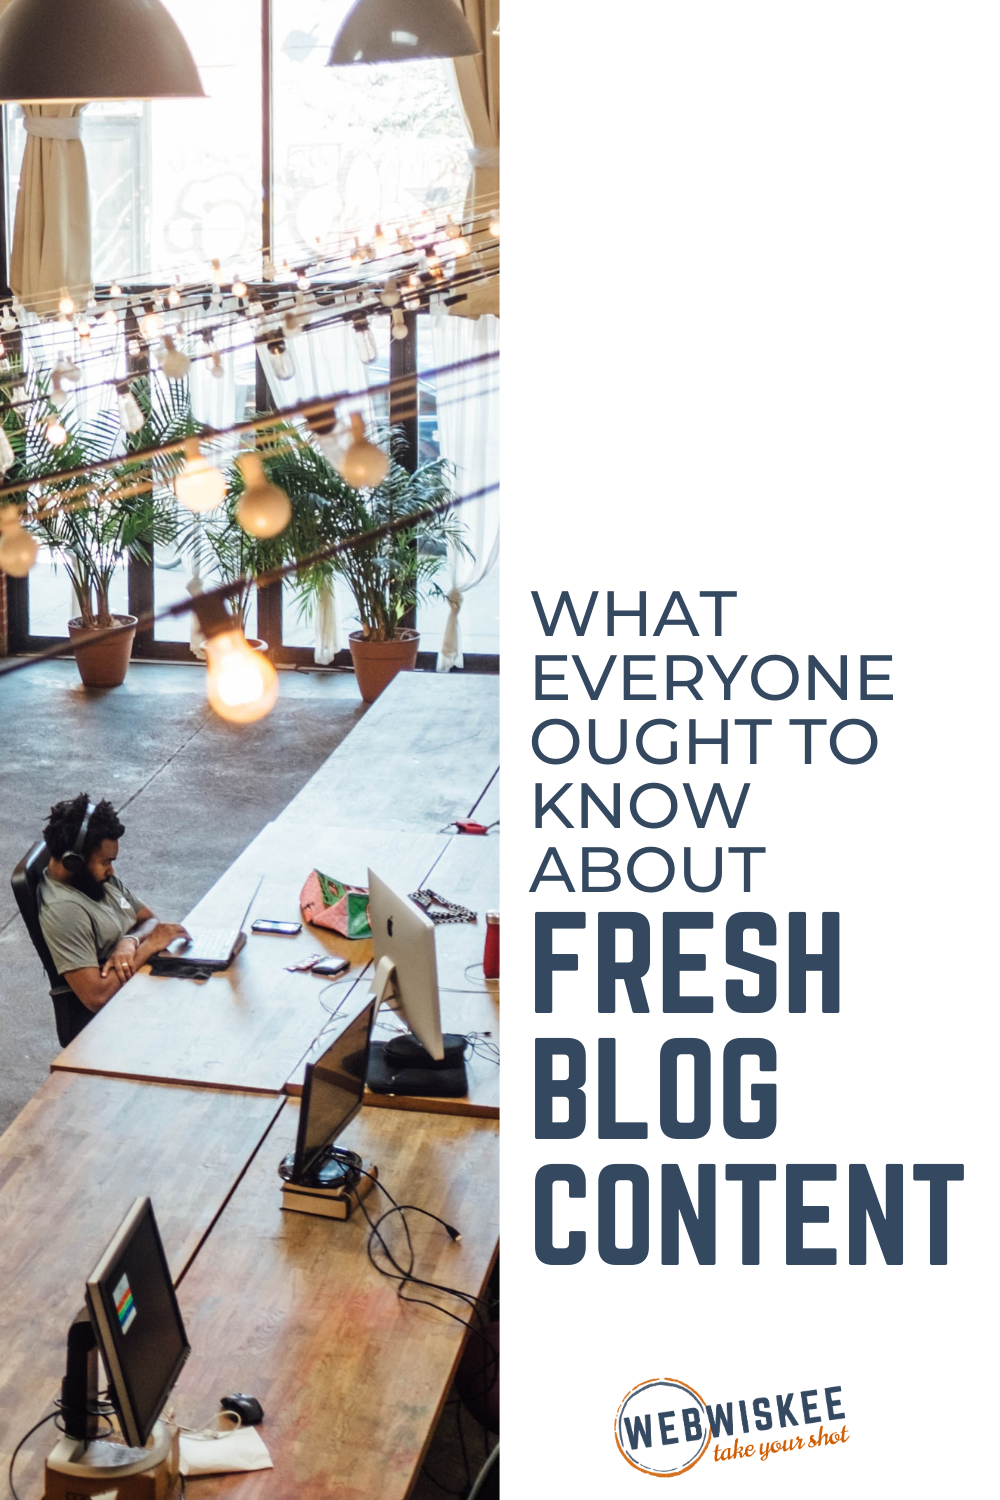 WHat everyone ought to know about fresh blog content by WebWiskee